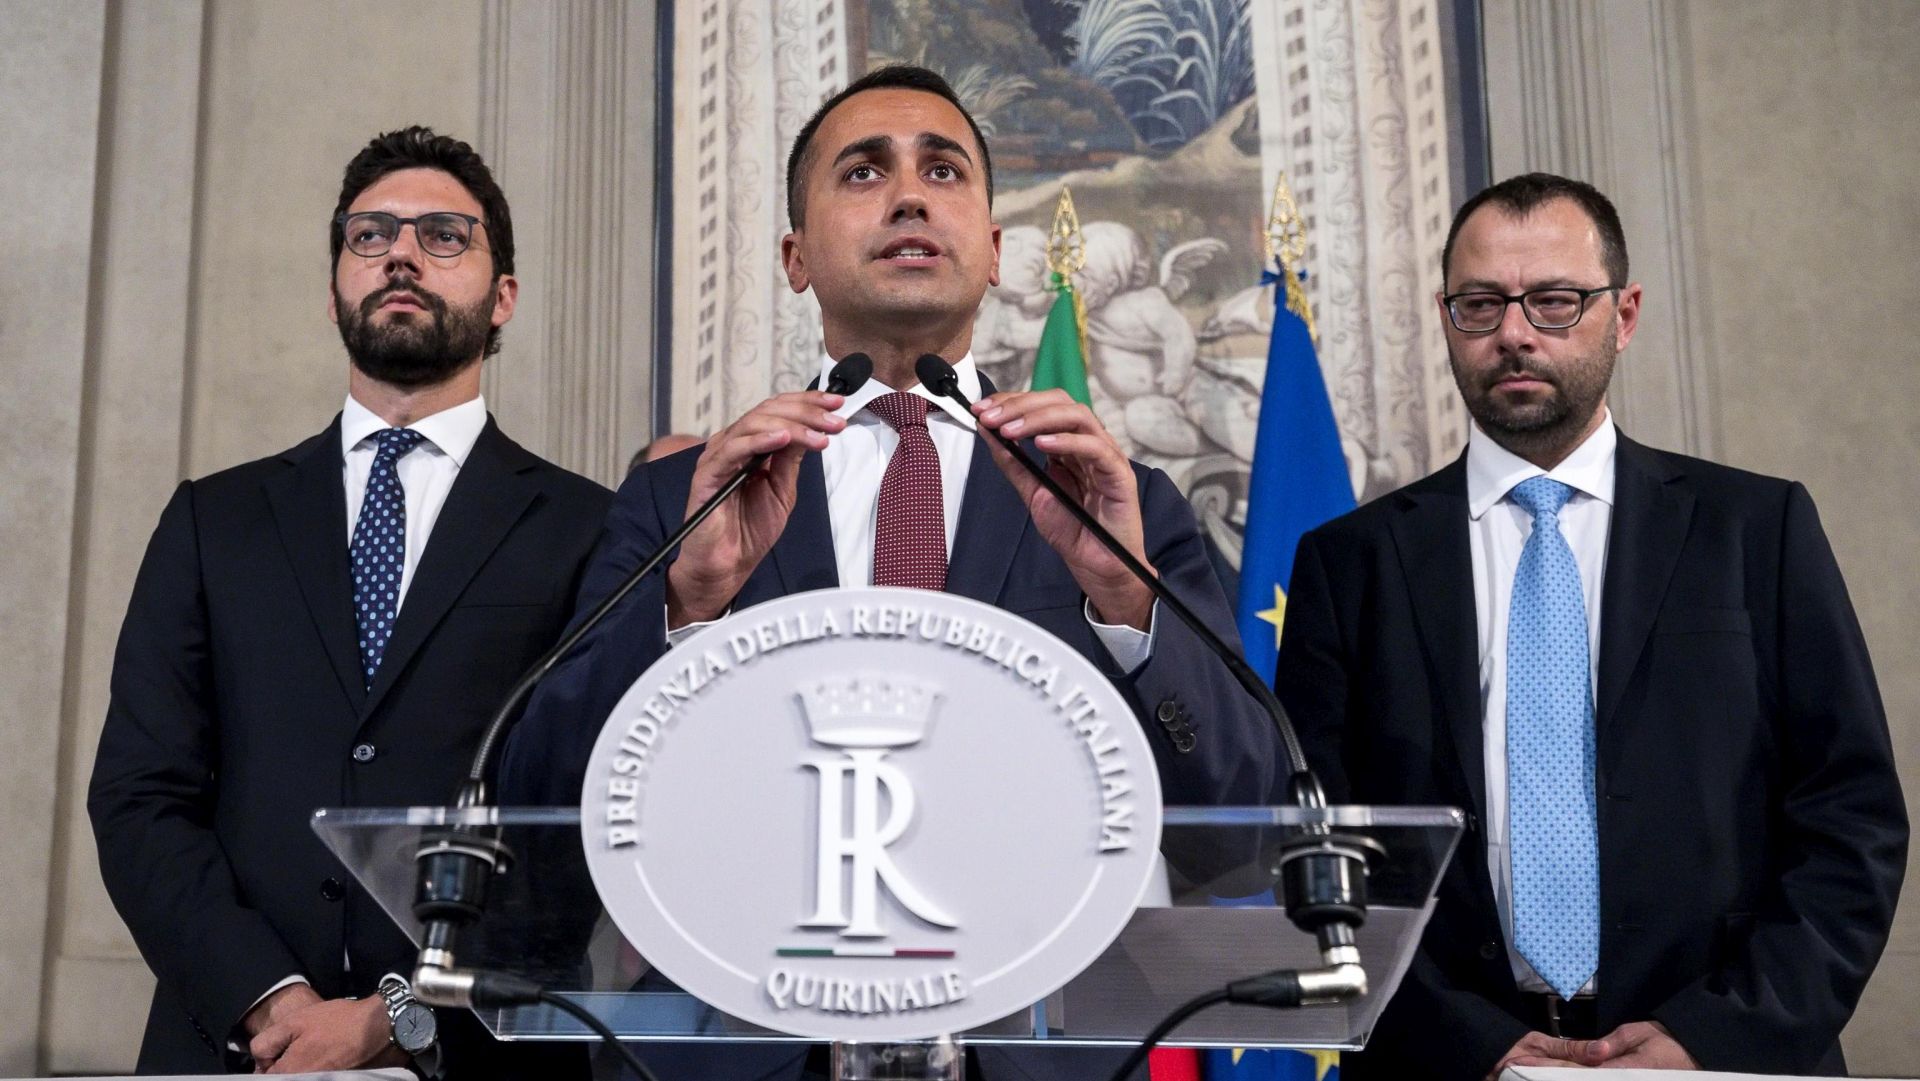 epa07786174 Italian Deputy Premier, Labour Minister and Five Star Movement (M5S) leader Luigi Di Maio Luigi Di Maio (C) addresses the media after a meeting with Italian President Sergio Mattarella at the Quirinale Palace for the first round of formal political consultations following the resignation of Prime Minister Giuseppe Conte, in Rome, Italy, 22 August 2019.  EPA/ANGELO CARCONI